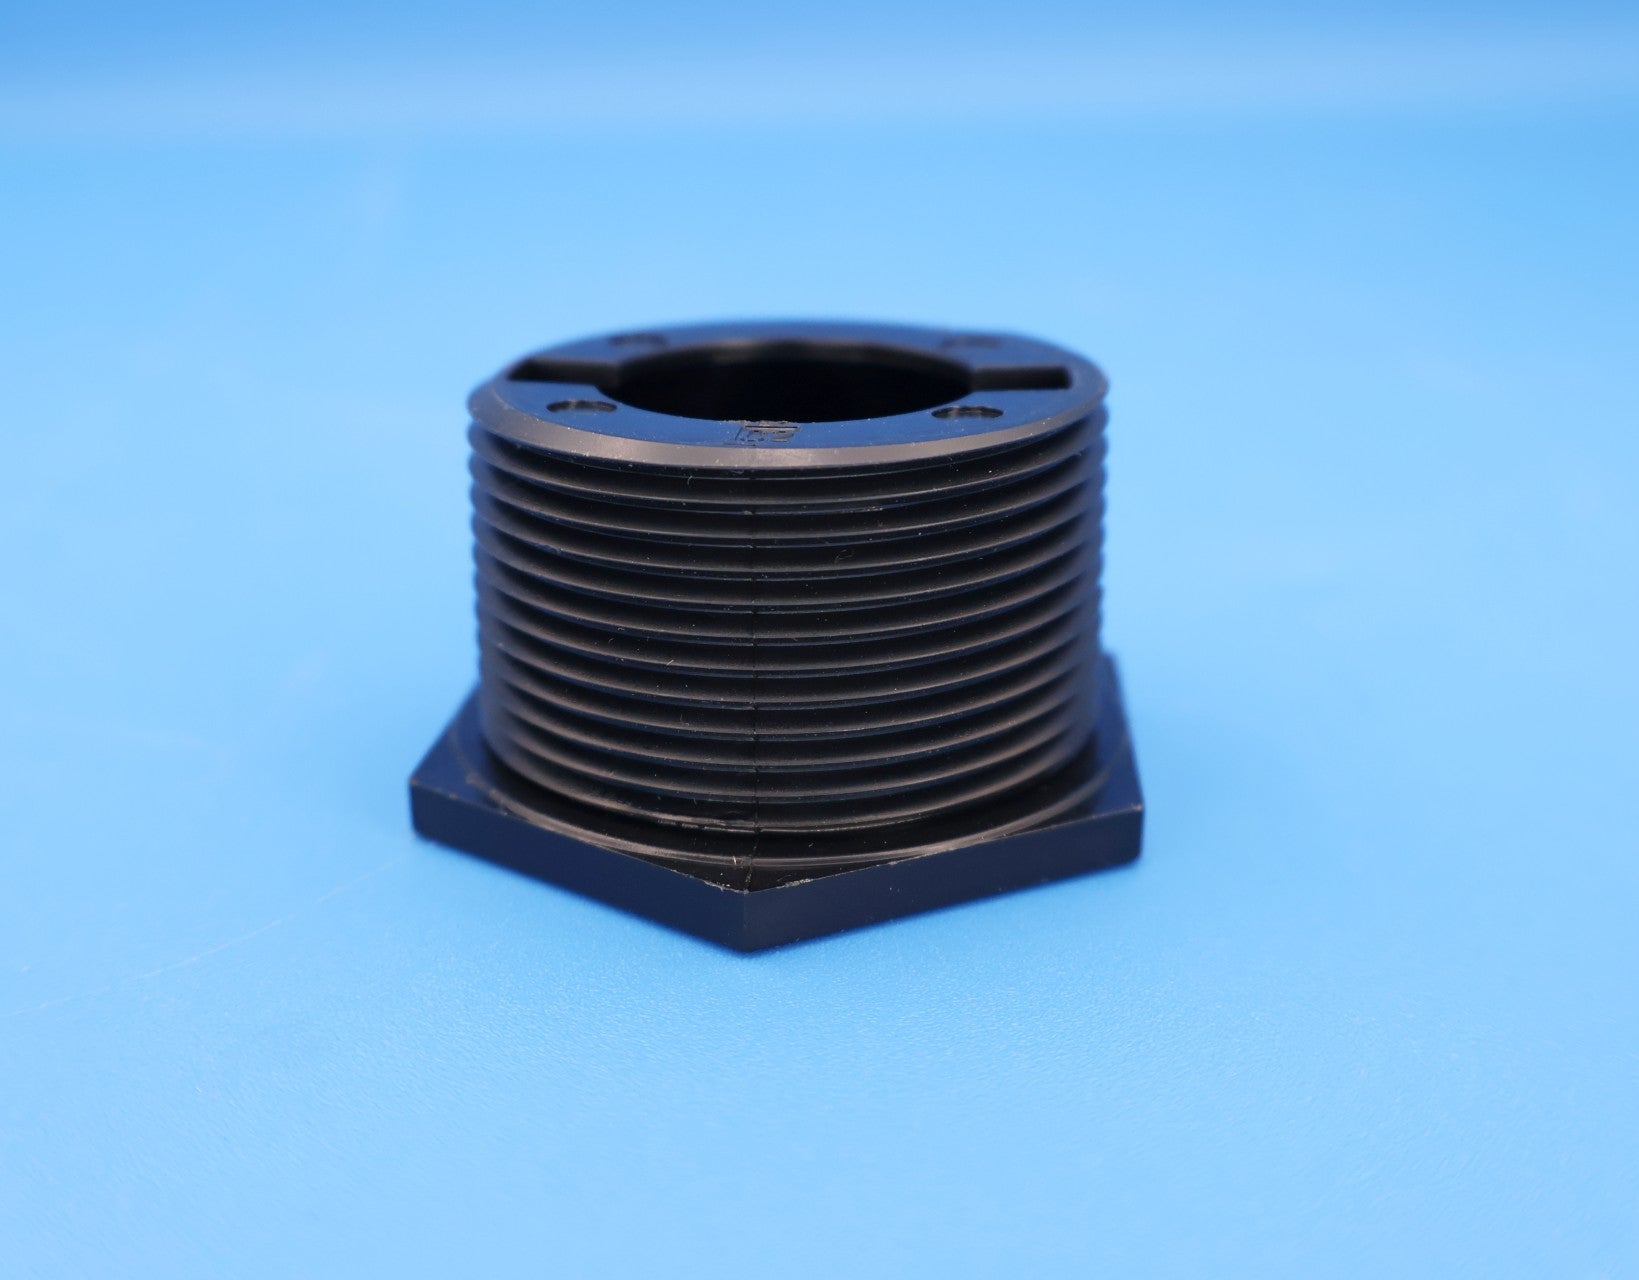 Jandy (Polaris) 3900 Sport Black Universal Wall Fitting 6-550-00 - Cleaner Parts - img-2